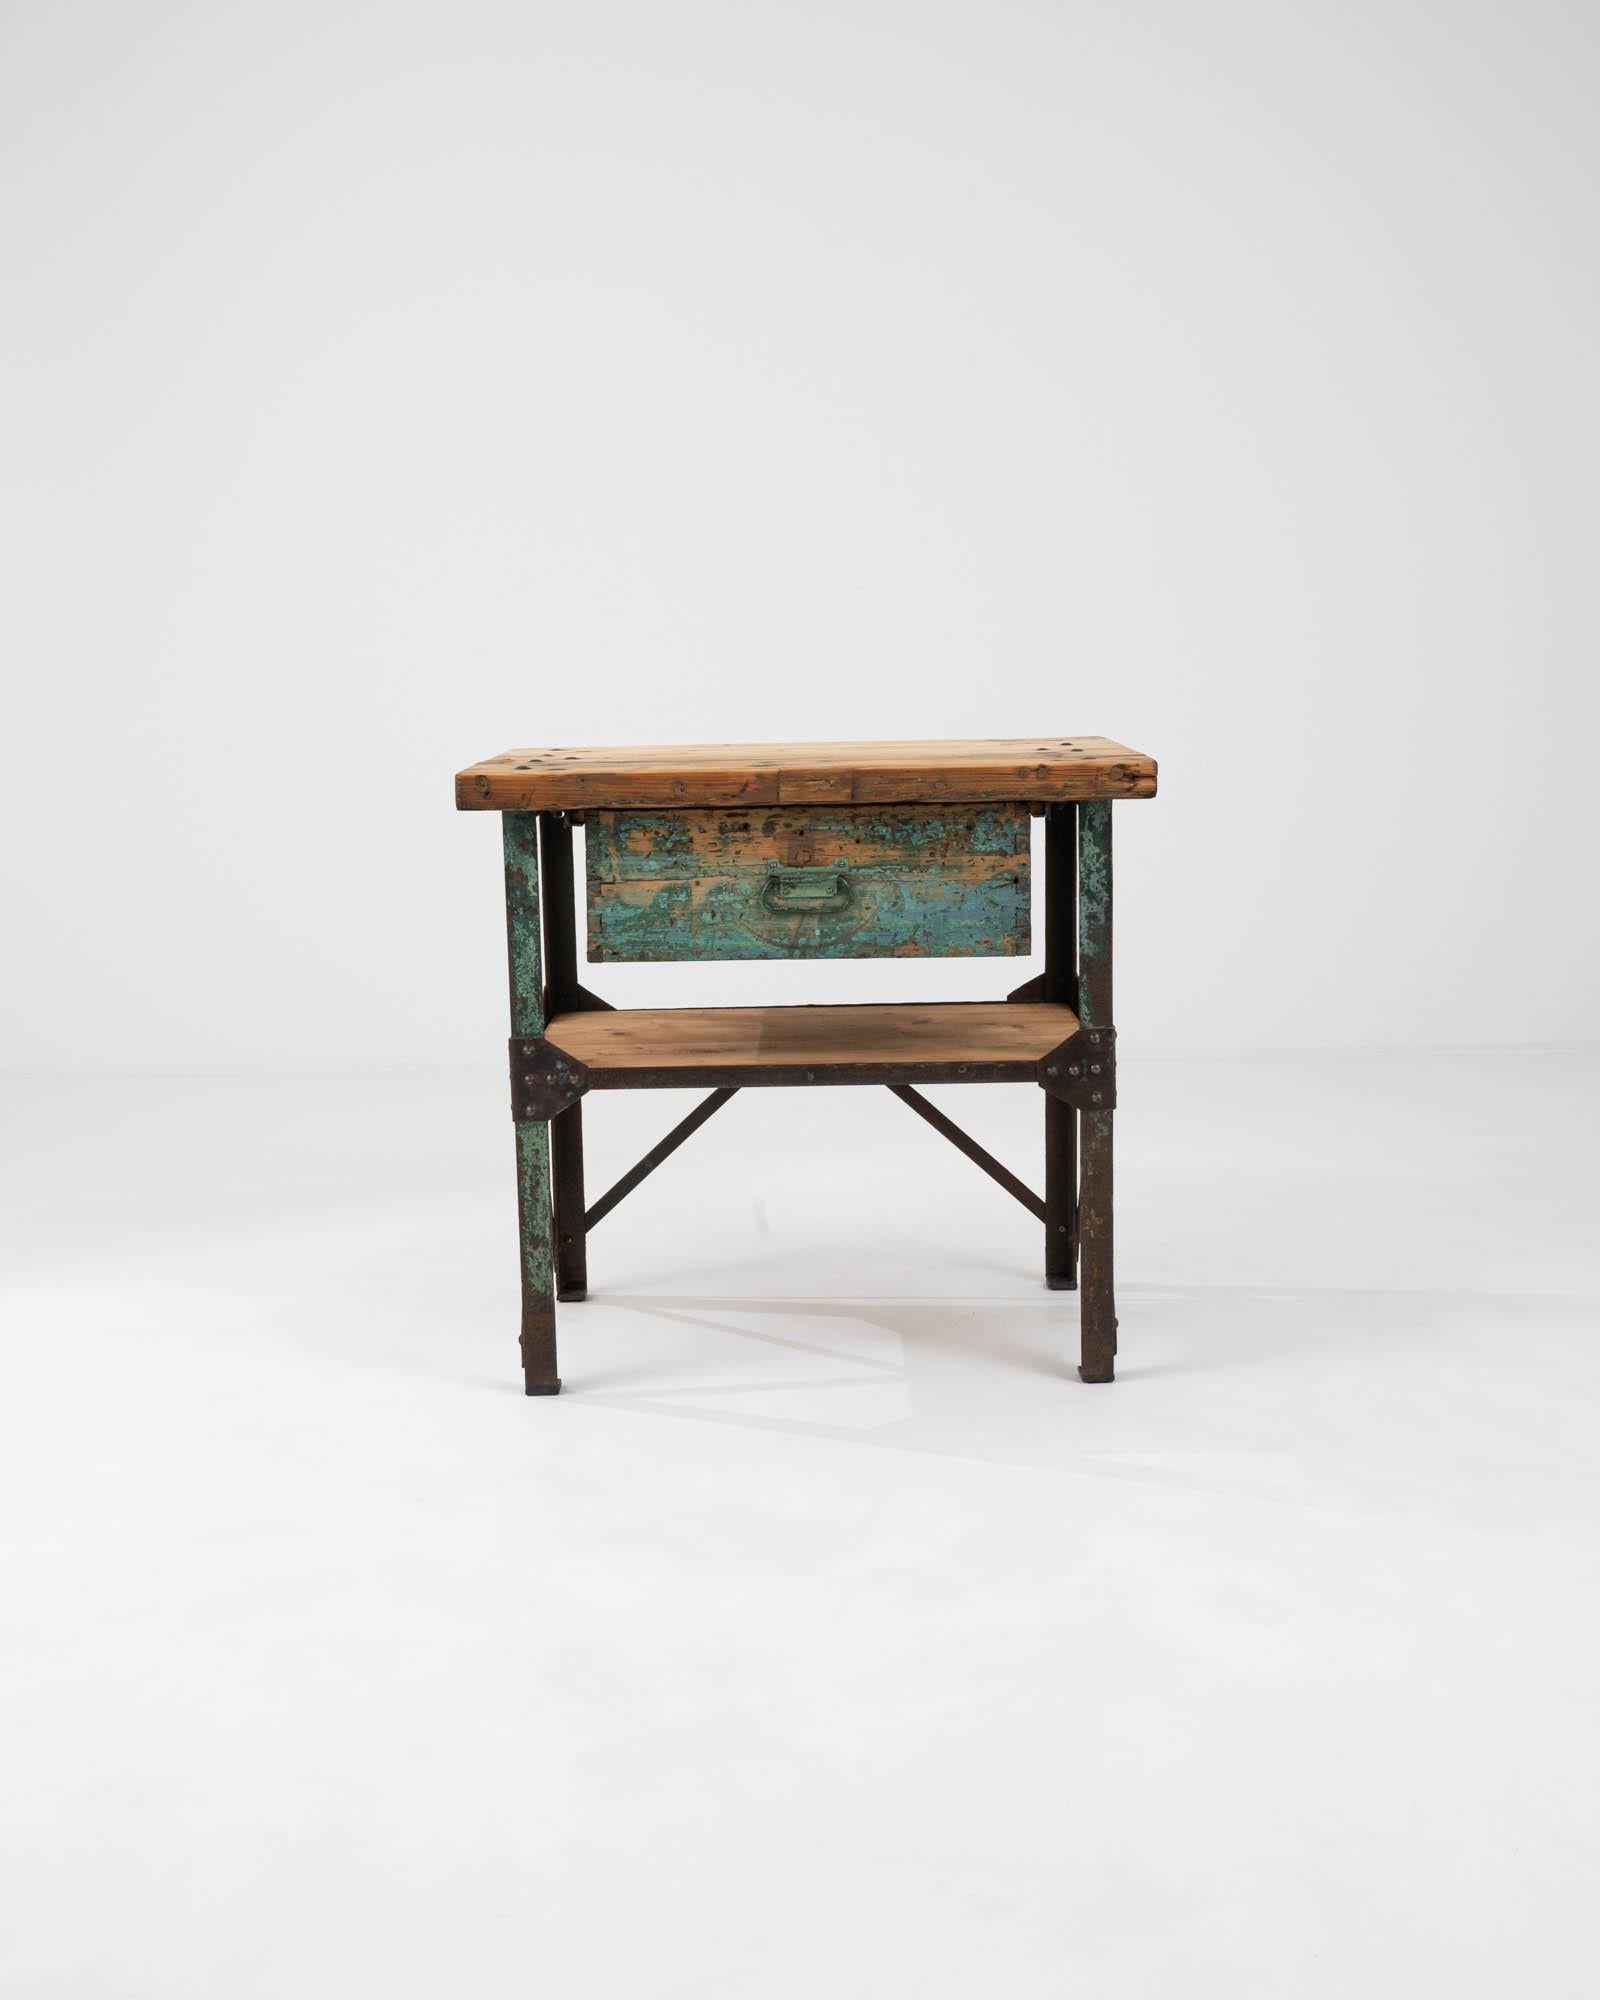 Introducing an exquisite piece of history and craftsmanship: the Early 20th Century French Metal & Wooden Work Table. This robust table stands as a testament to enduring design, featuring a solid wood top that bears the rich patina of time, telling